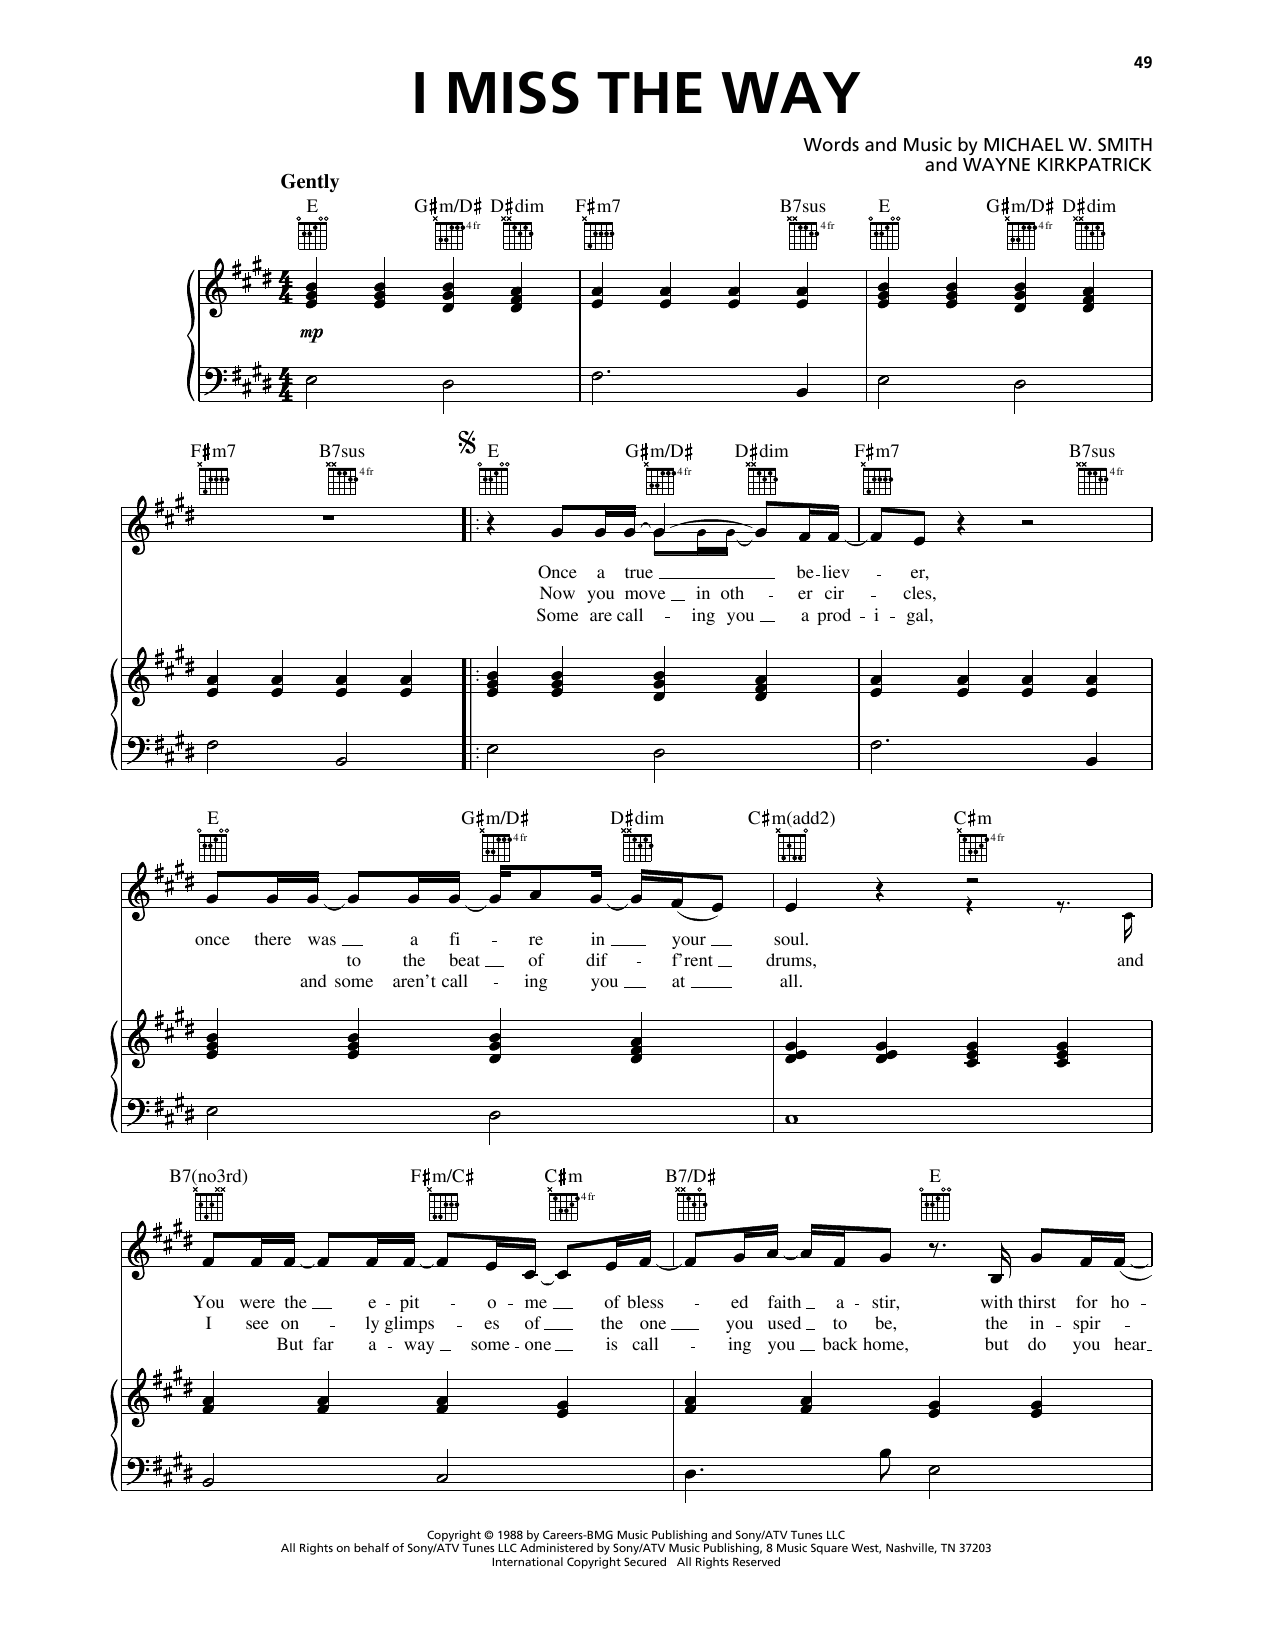 Download Michael W. Smith I Miss The Way Sheet Music